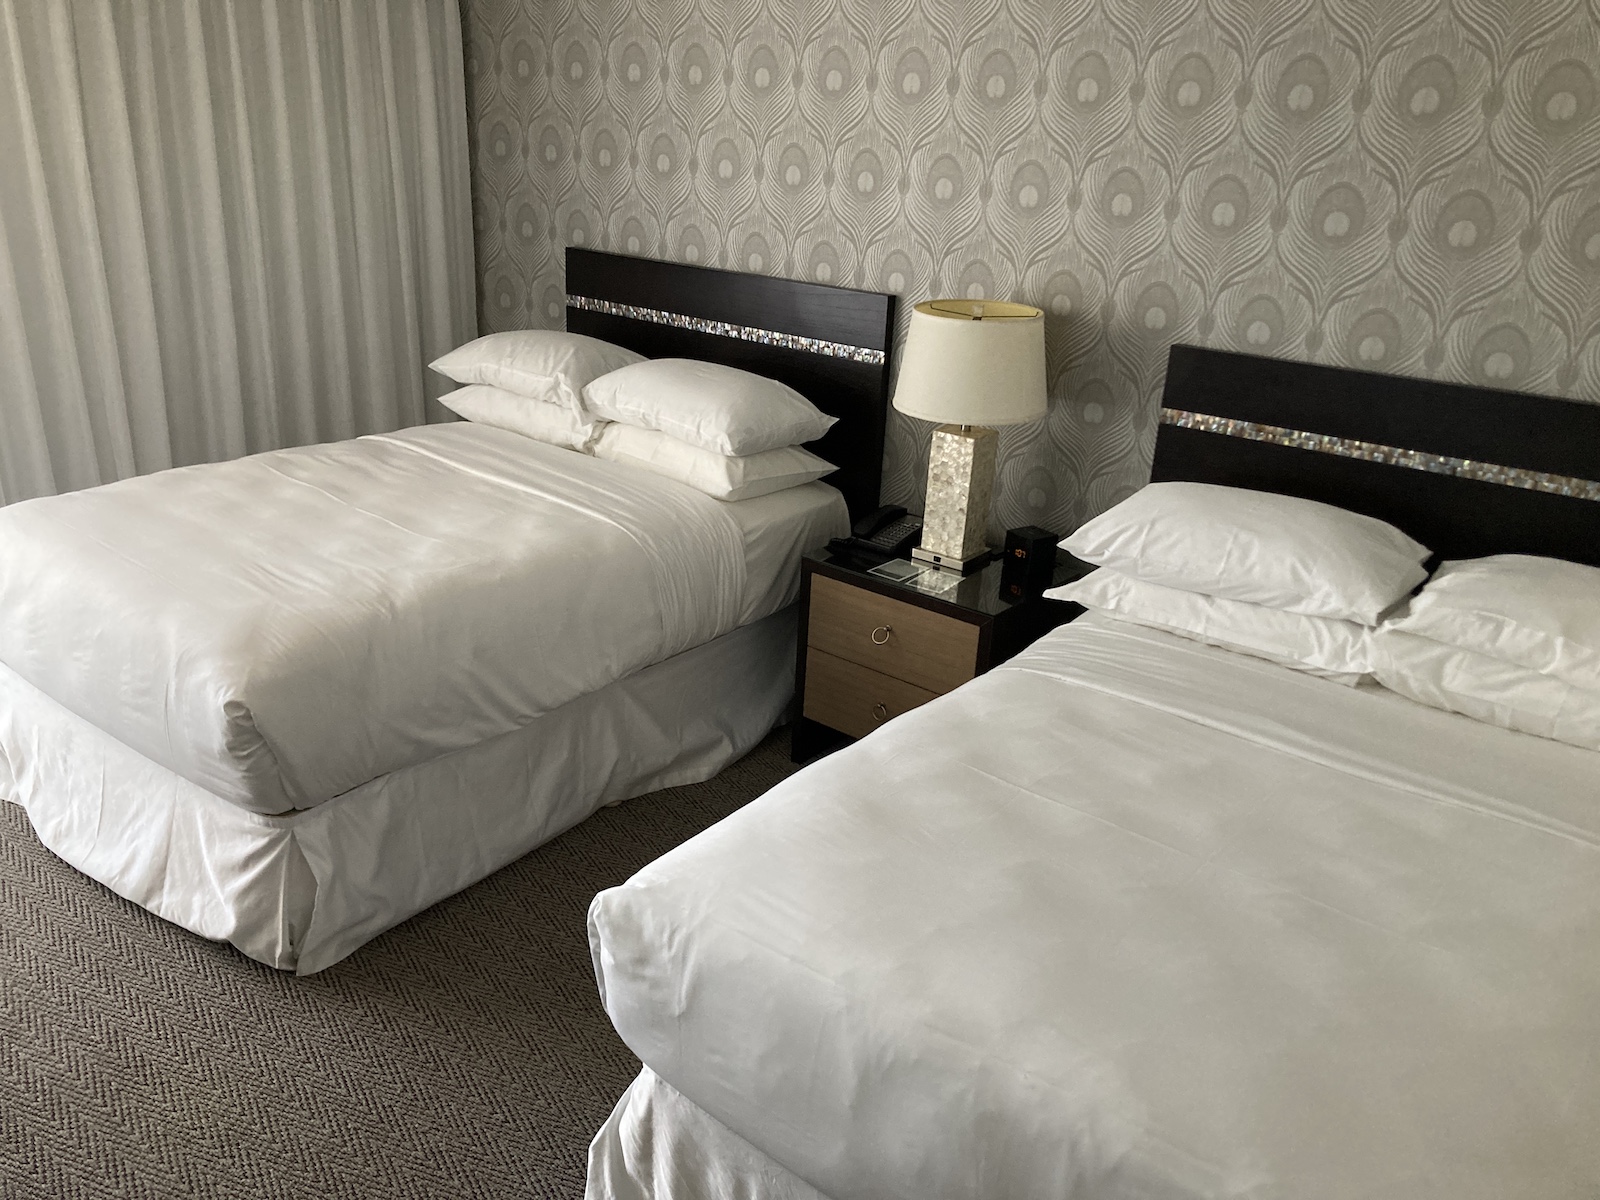 Image of two beds in a hotel room